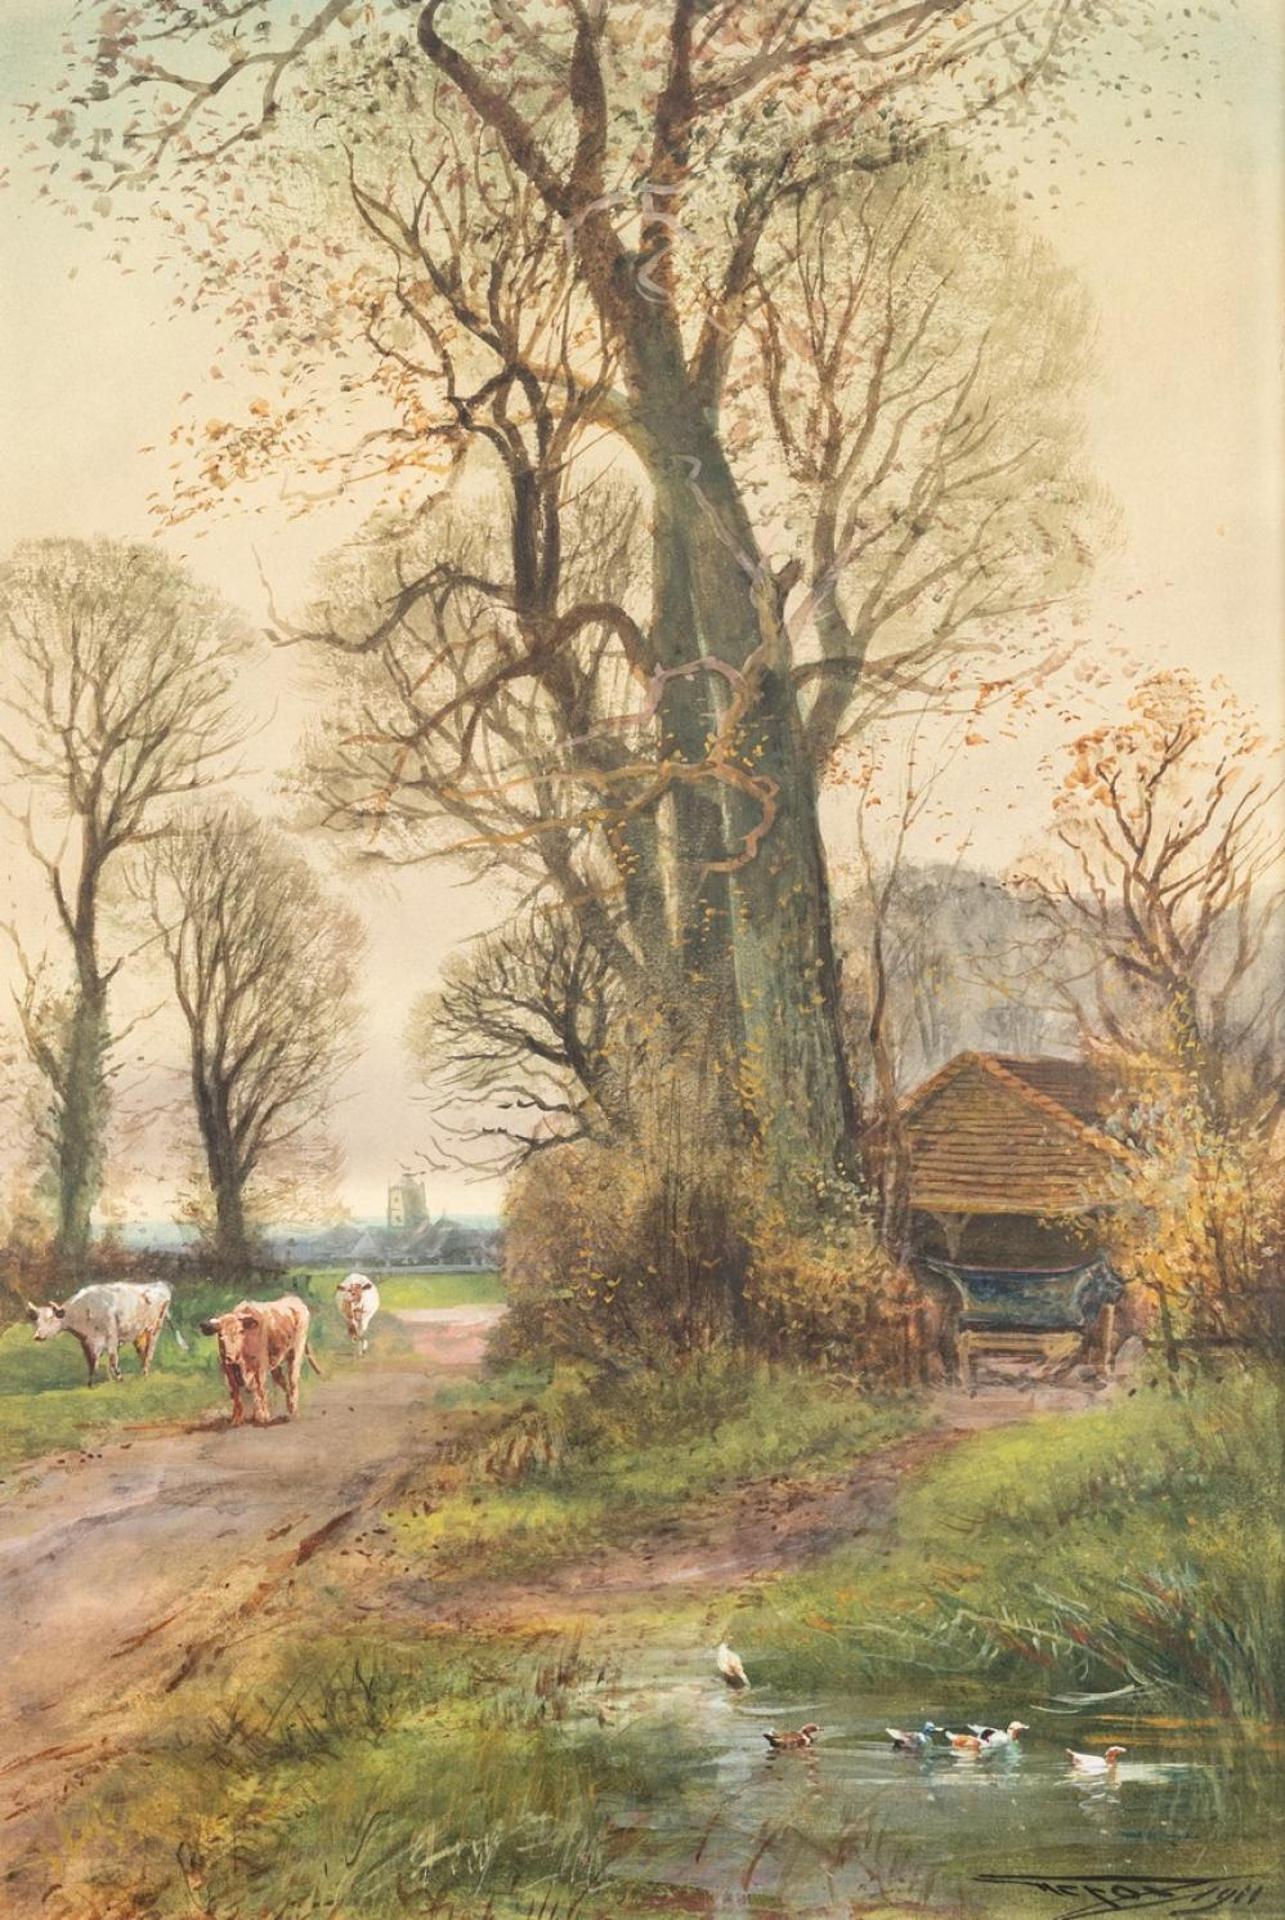 Henry Charles Fox (1860-1925) - Cattle and Ducks in a Landscape